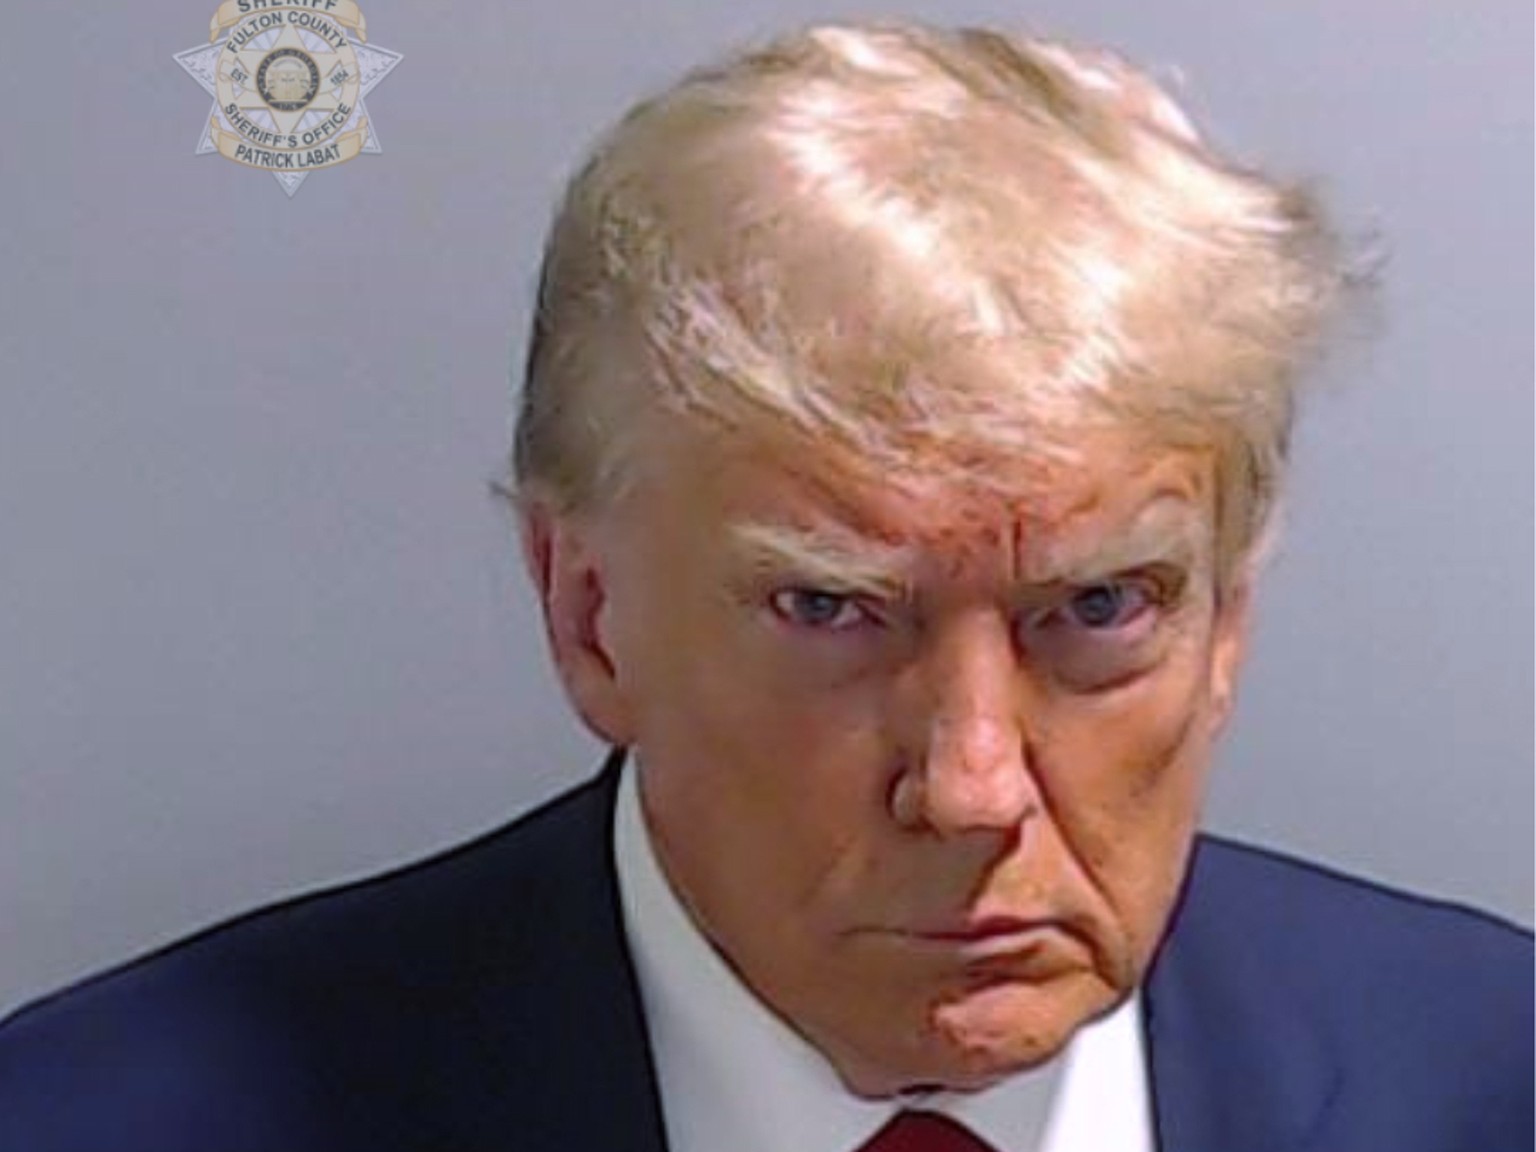 This booking photo provided by the Fulton County Sheriff?s Office shows former President Donald Trump on Thursday, Aug. 24, 2023, after he surrendered and was booked at the Fulton County Jail in Atlan ...